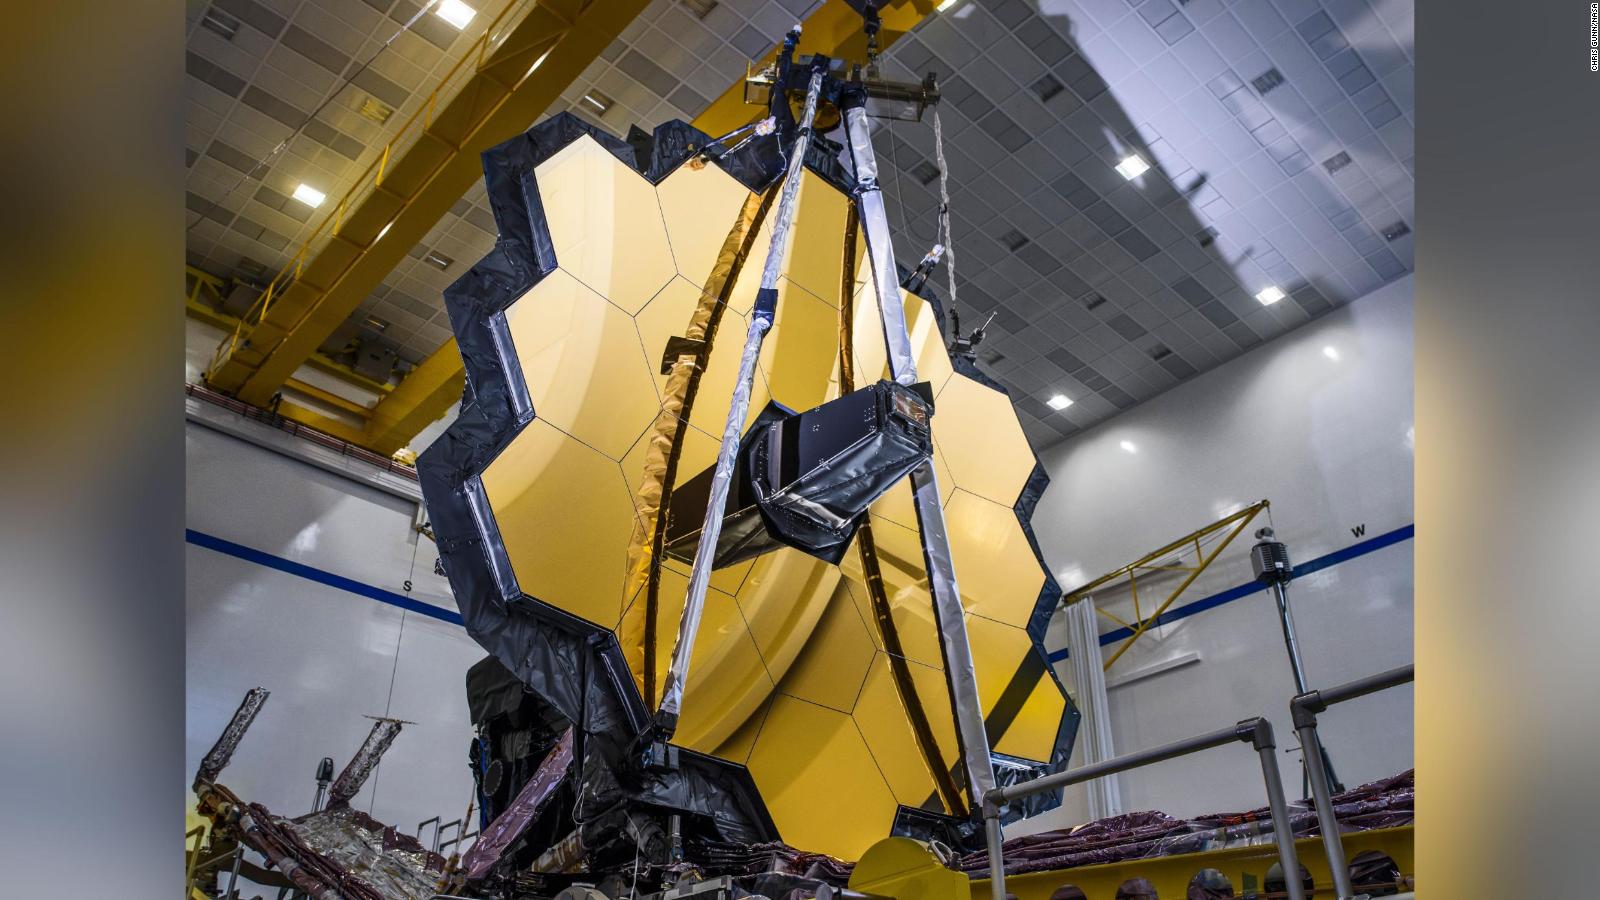 NASA shares a look at an image from the James Webb Telescope